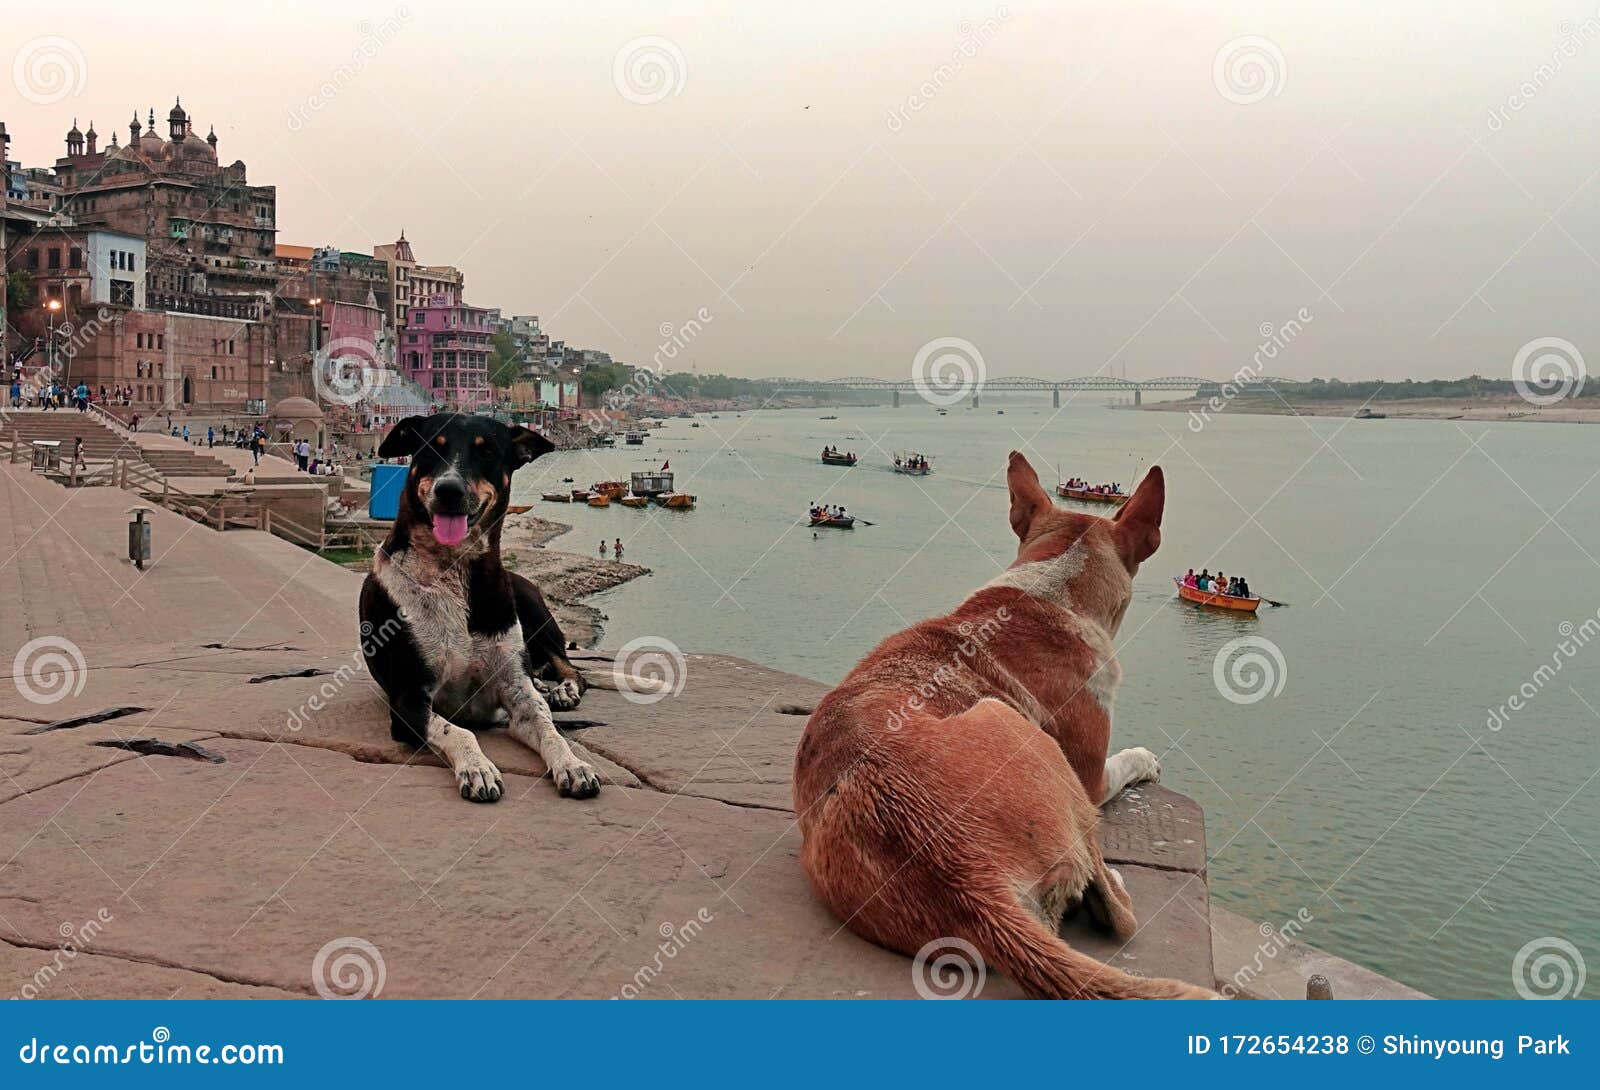 travel to india with dog